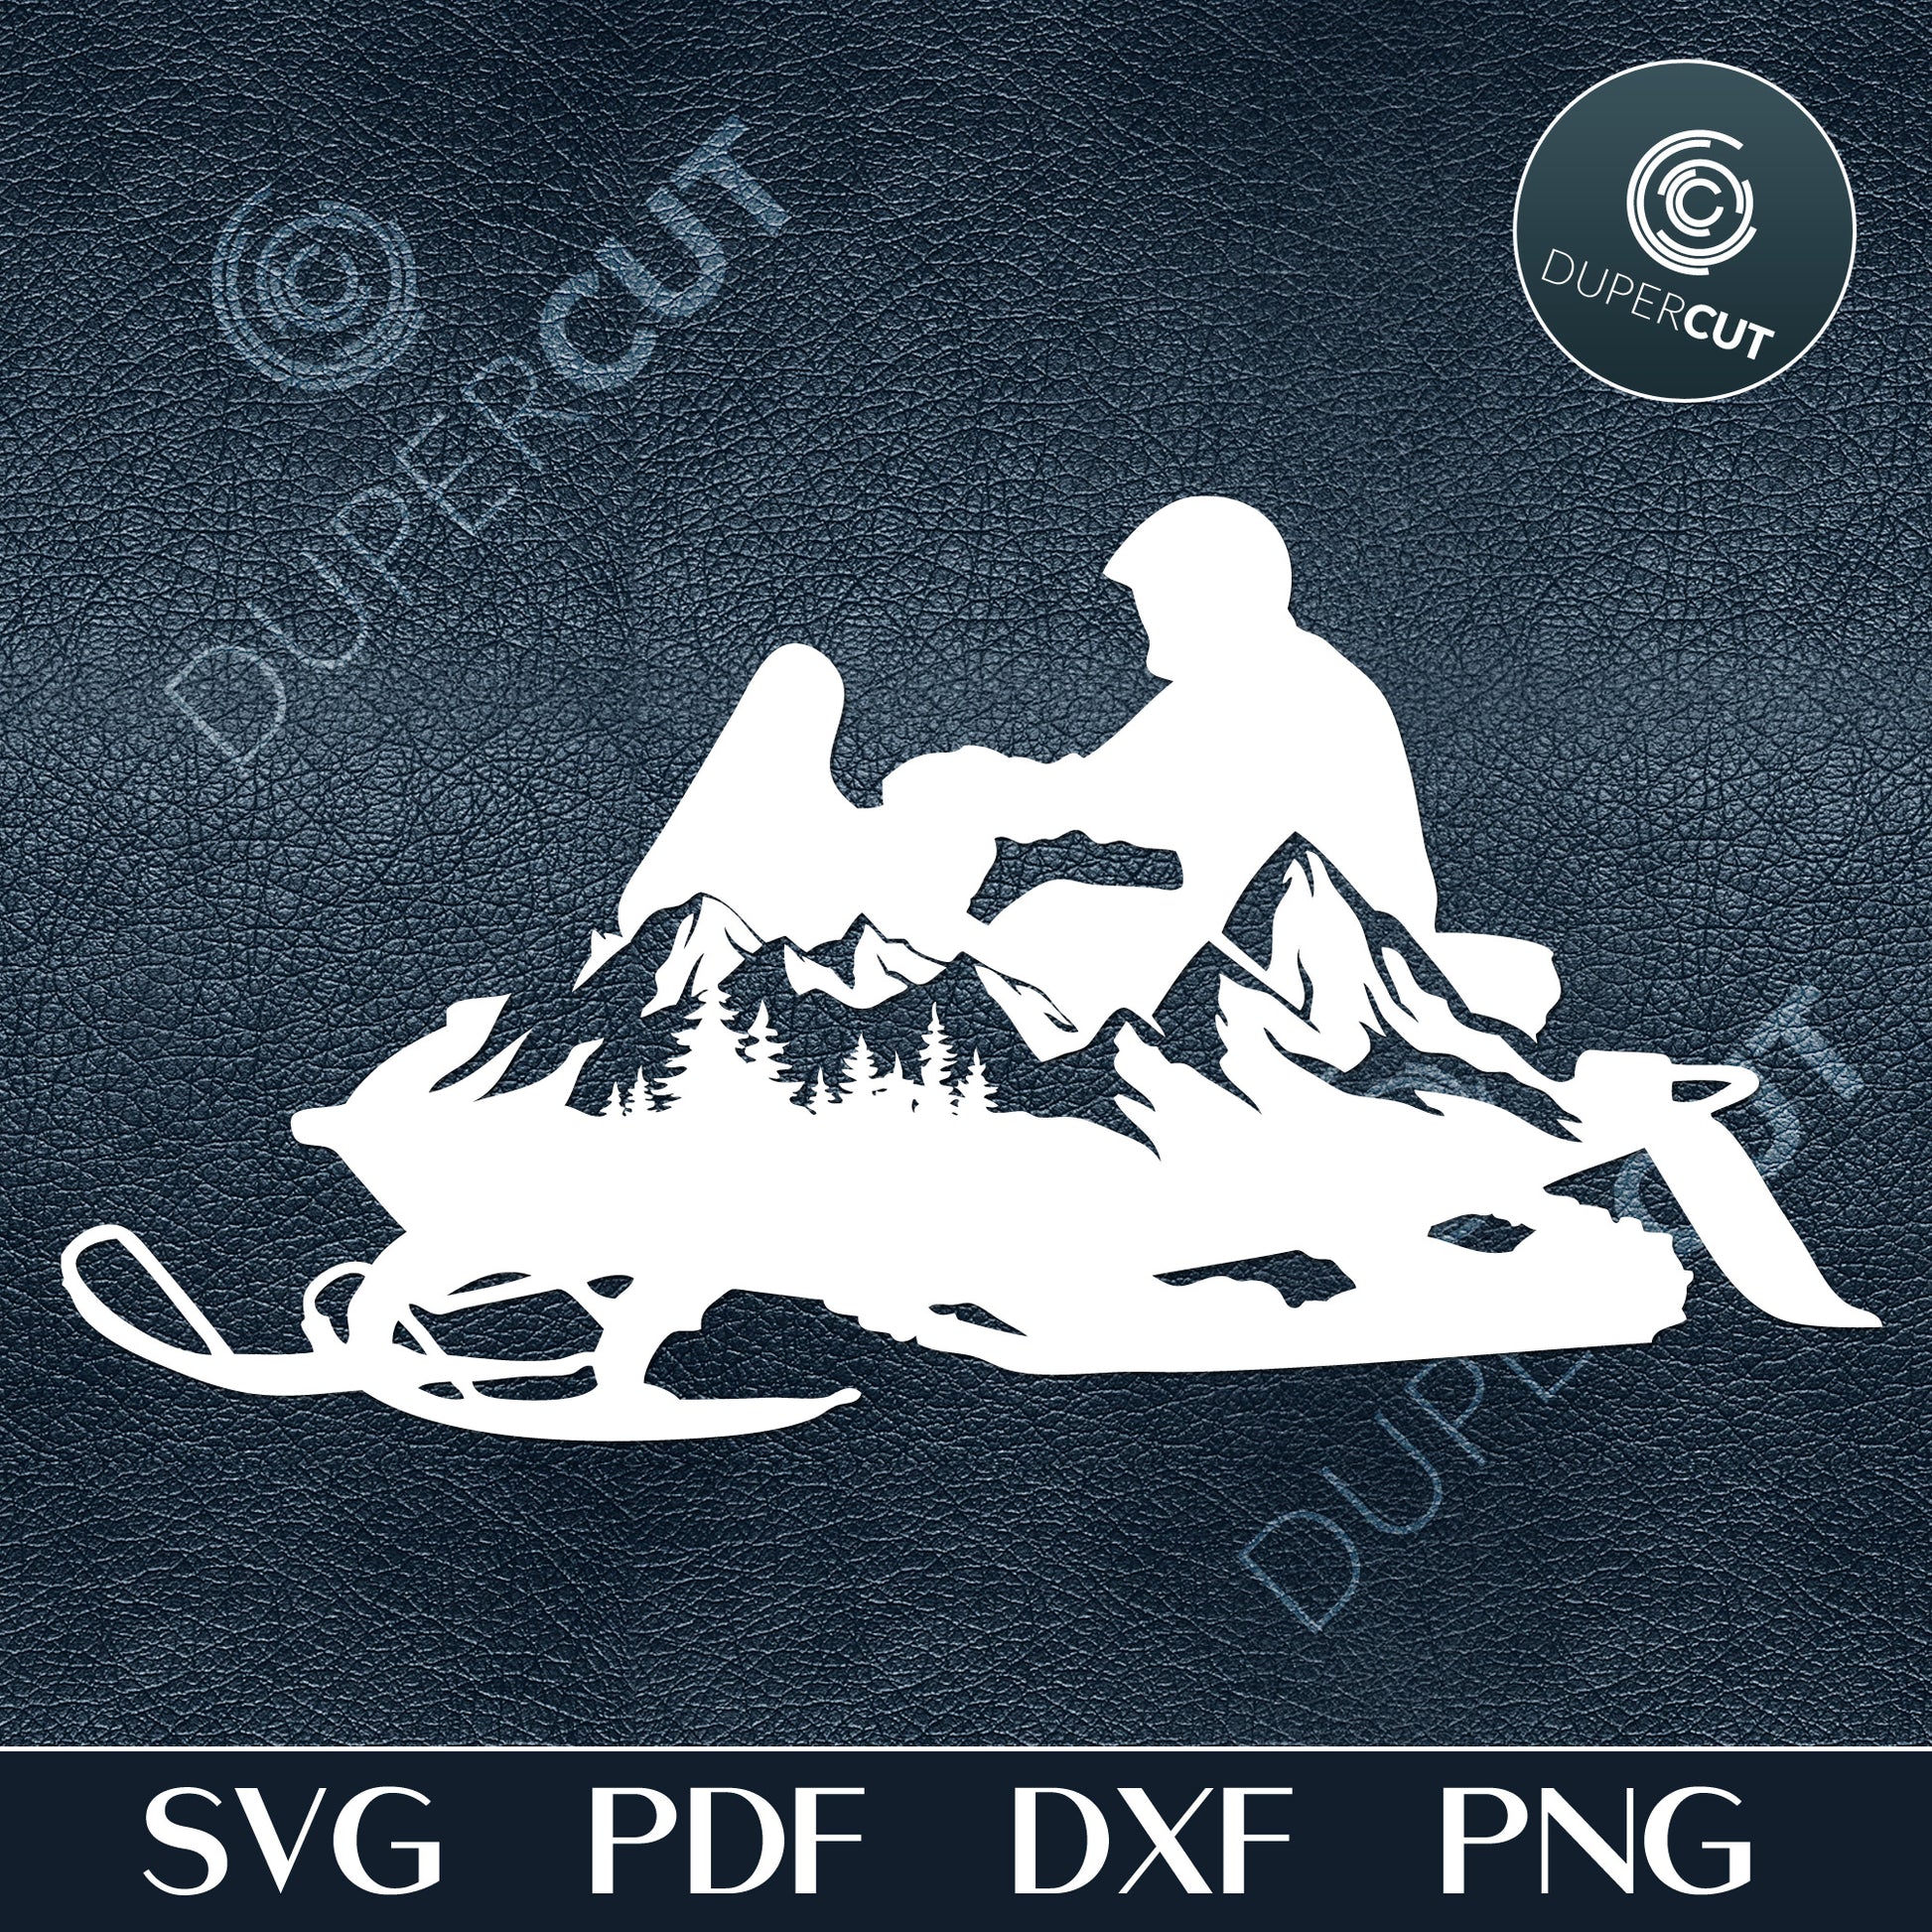 Snowmobile silhouette with mountains, vinyl cutting  template - SVG DXF PNG files for Cricut, Glowforge, Silhouette Cameo, CNC Machines